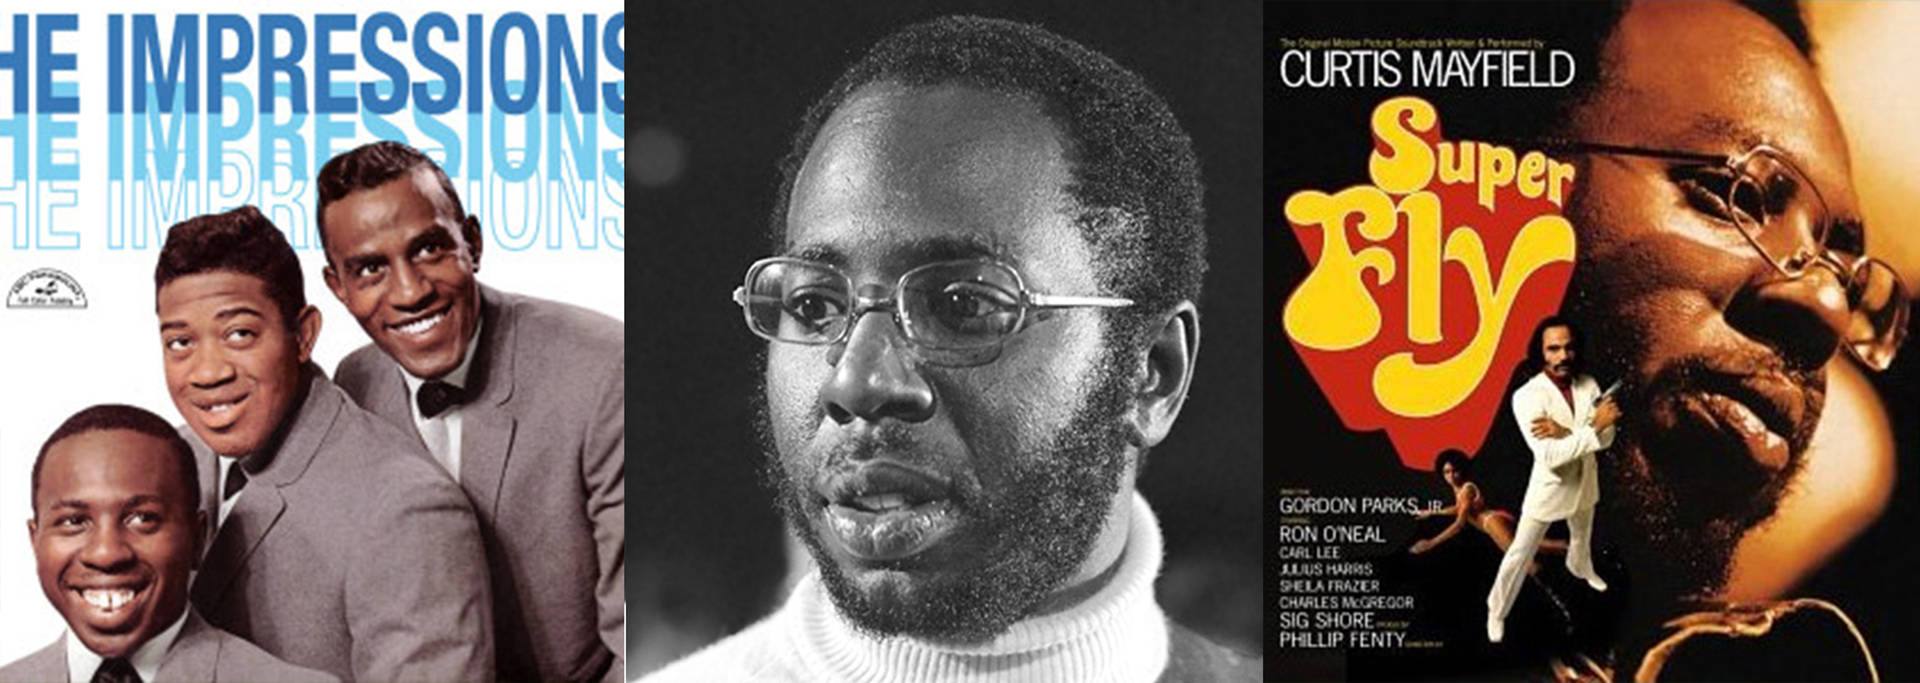 Curtis Mayfield And The Impressions Album Compilation Wallpaper